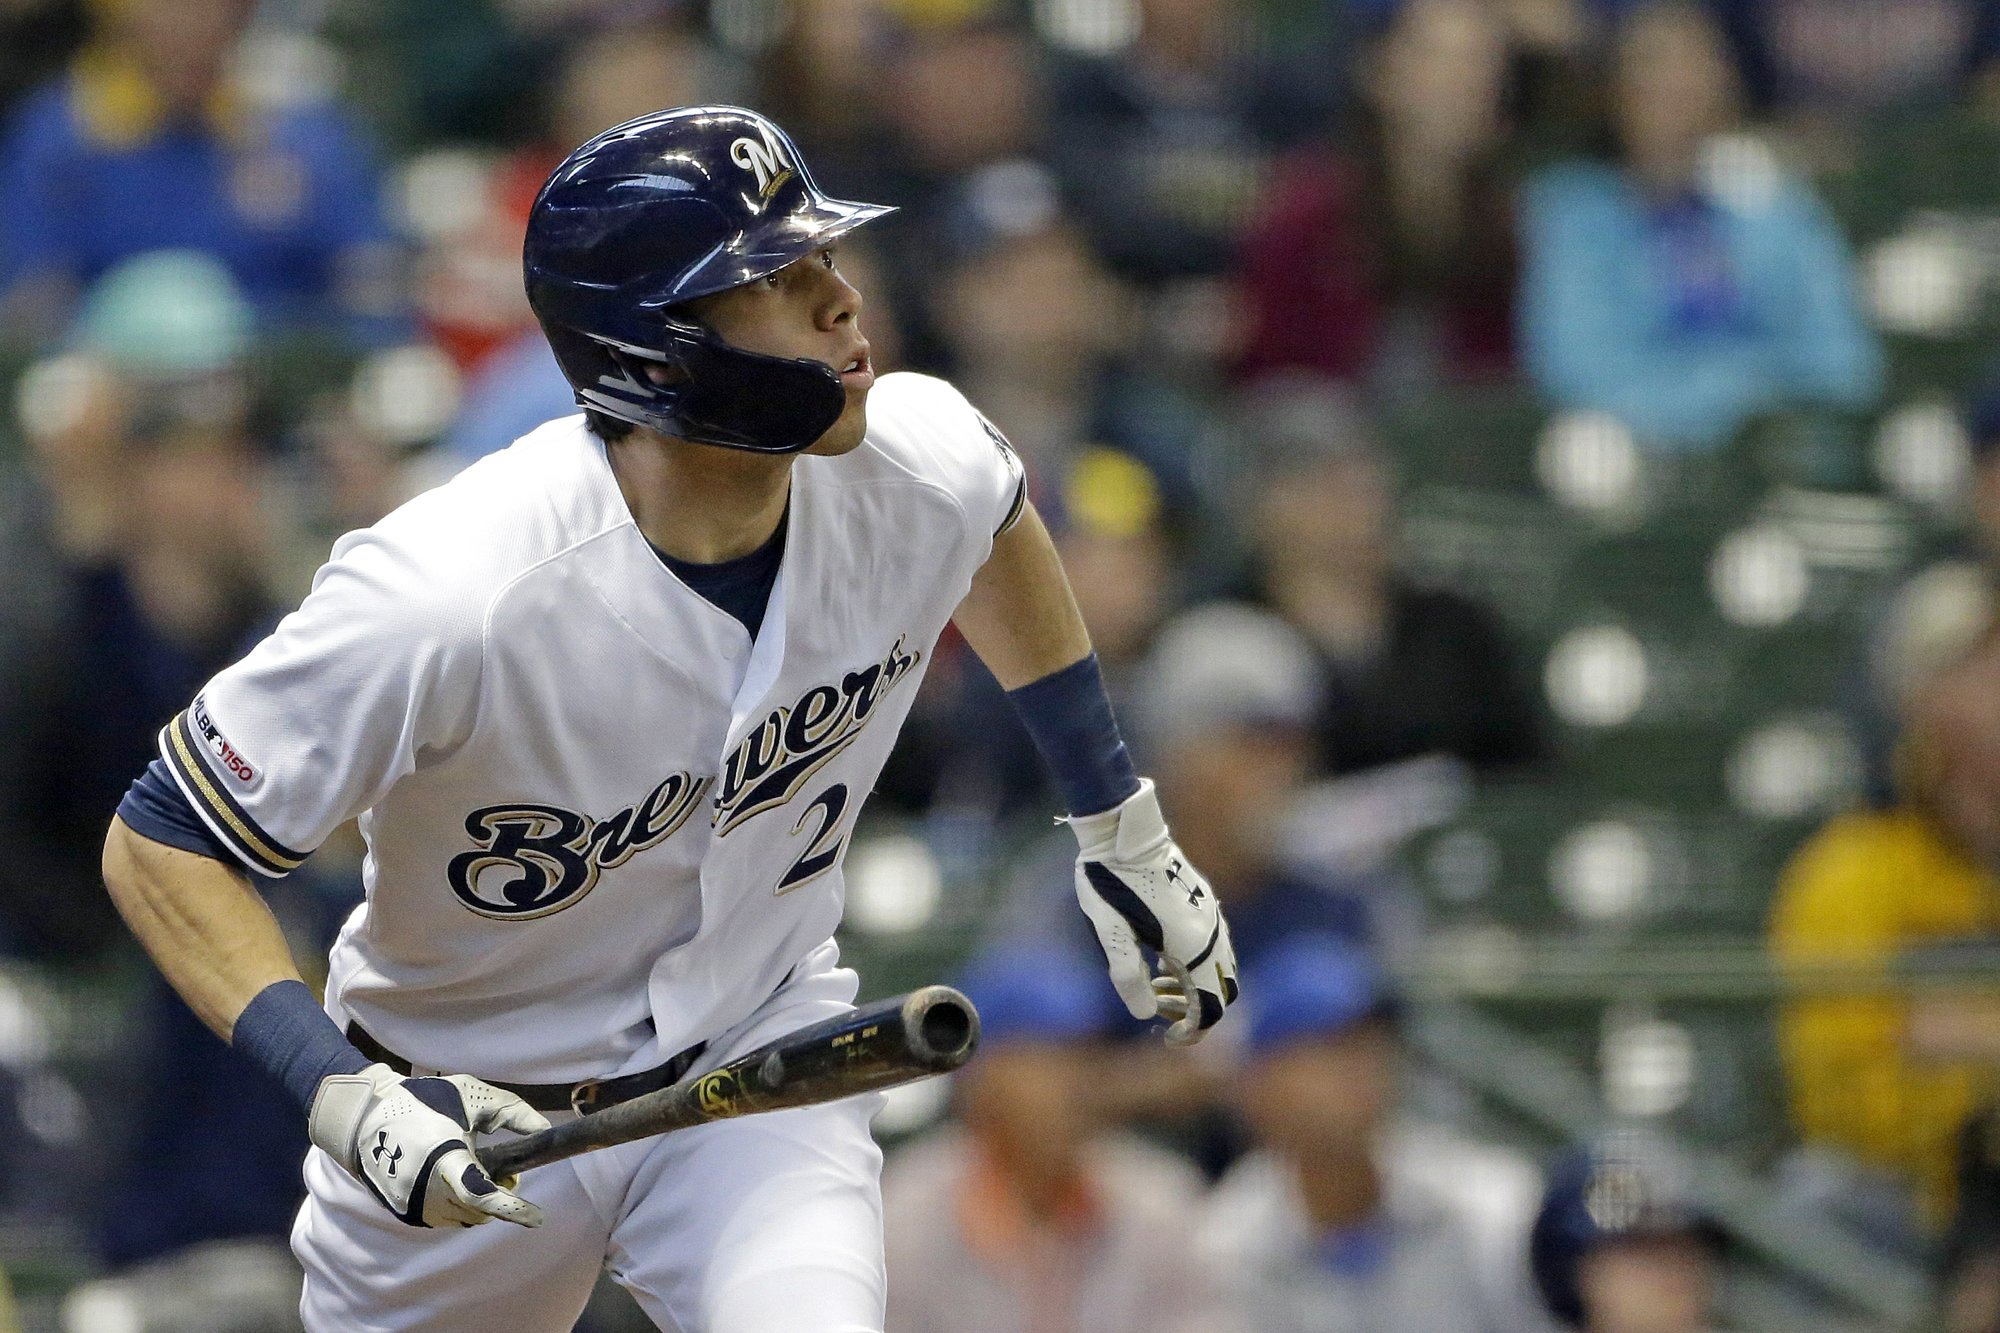 BREWERS vs. PADRES: MLB home run leaders go head-to-head in pitcher-friendly Petco Park